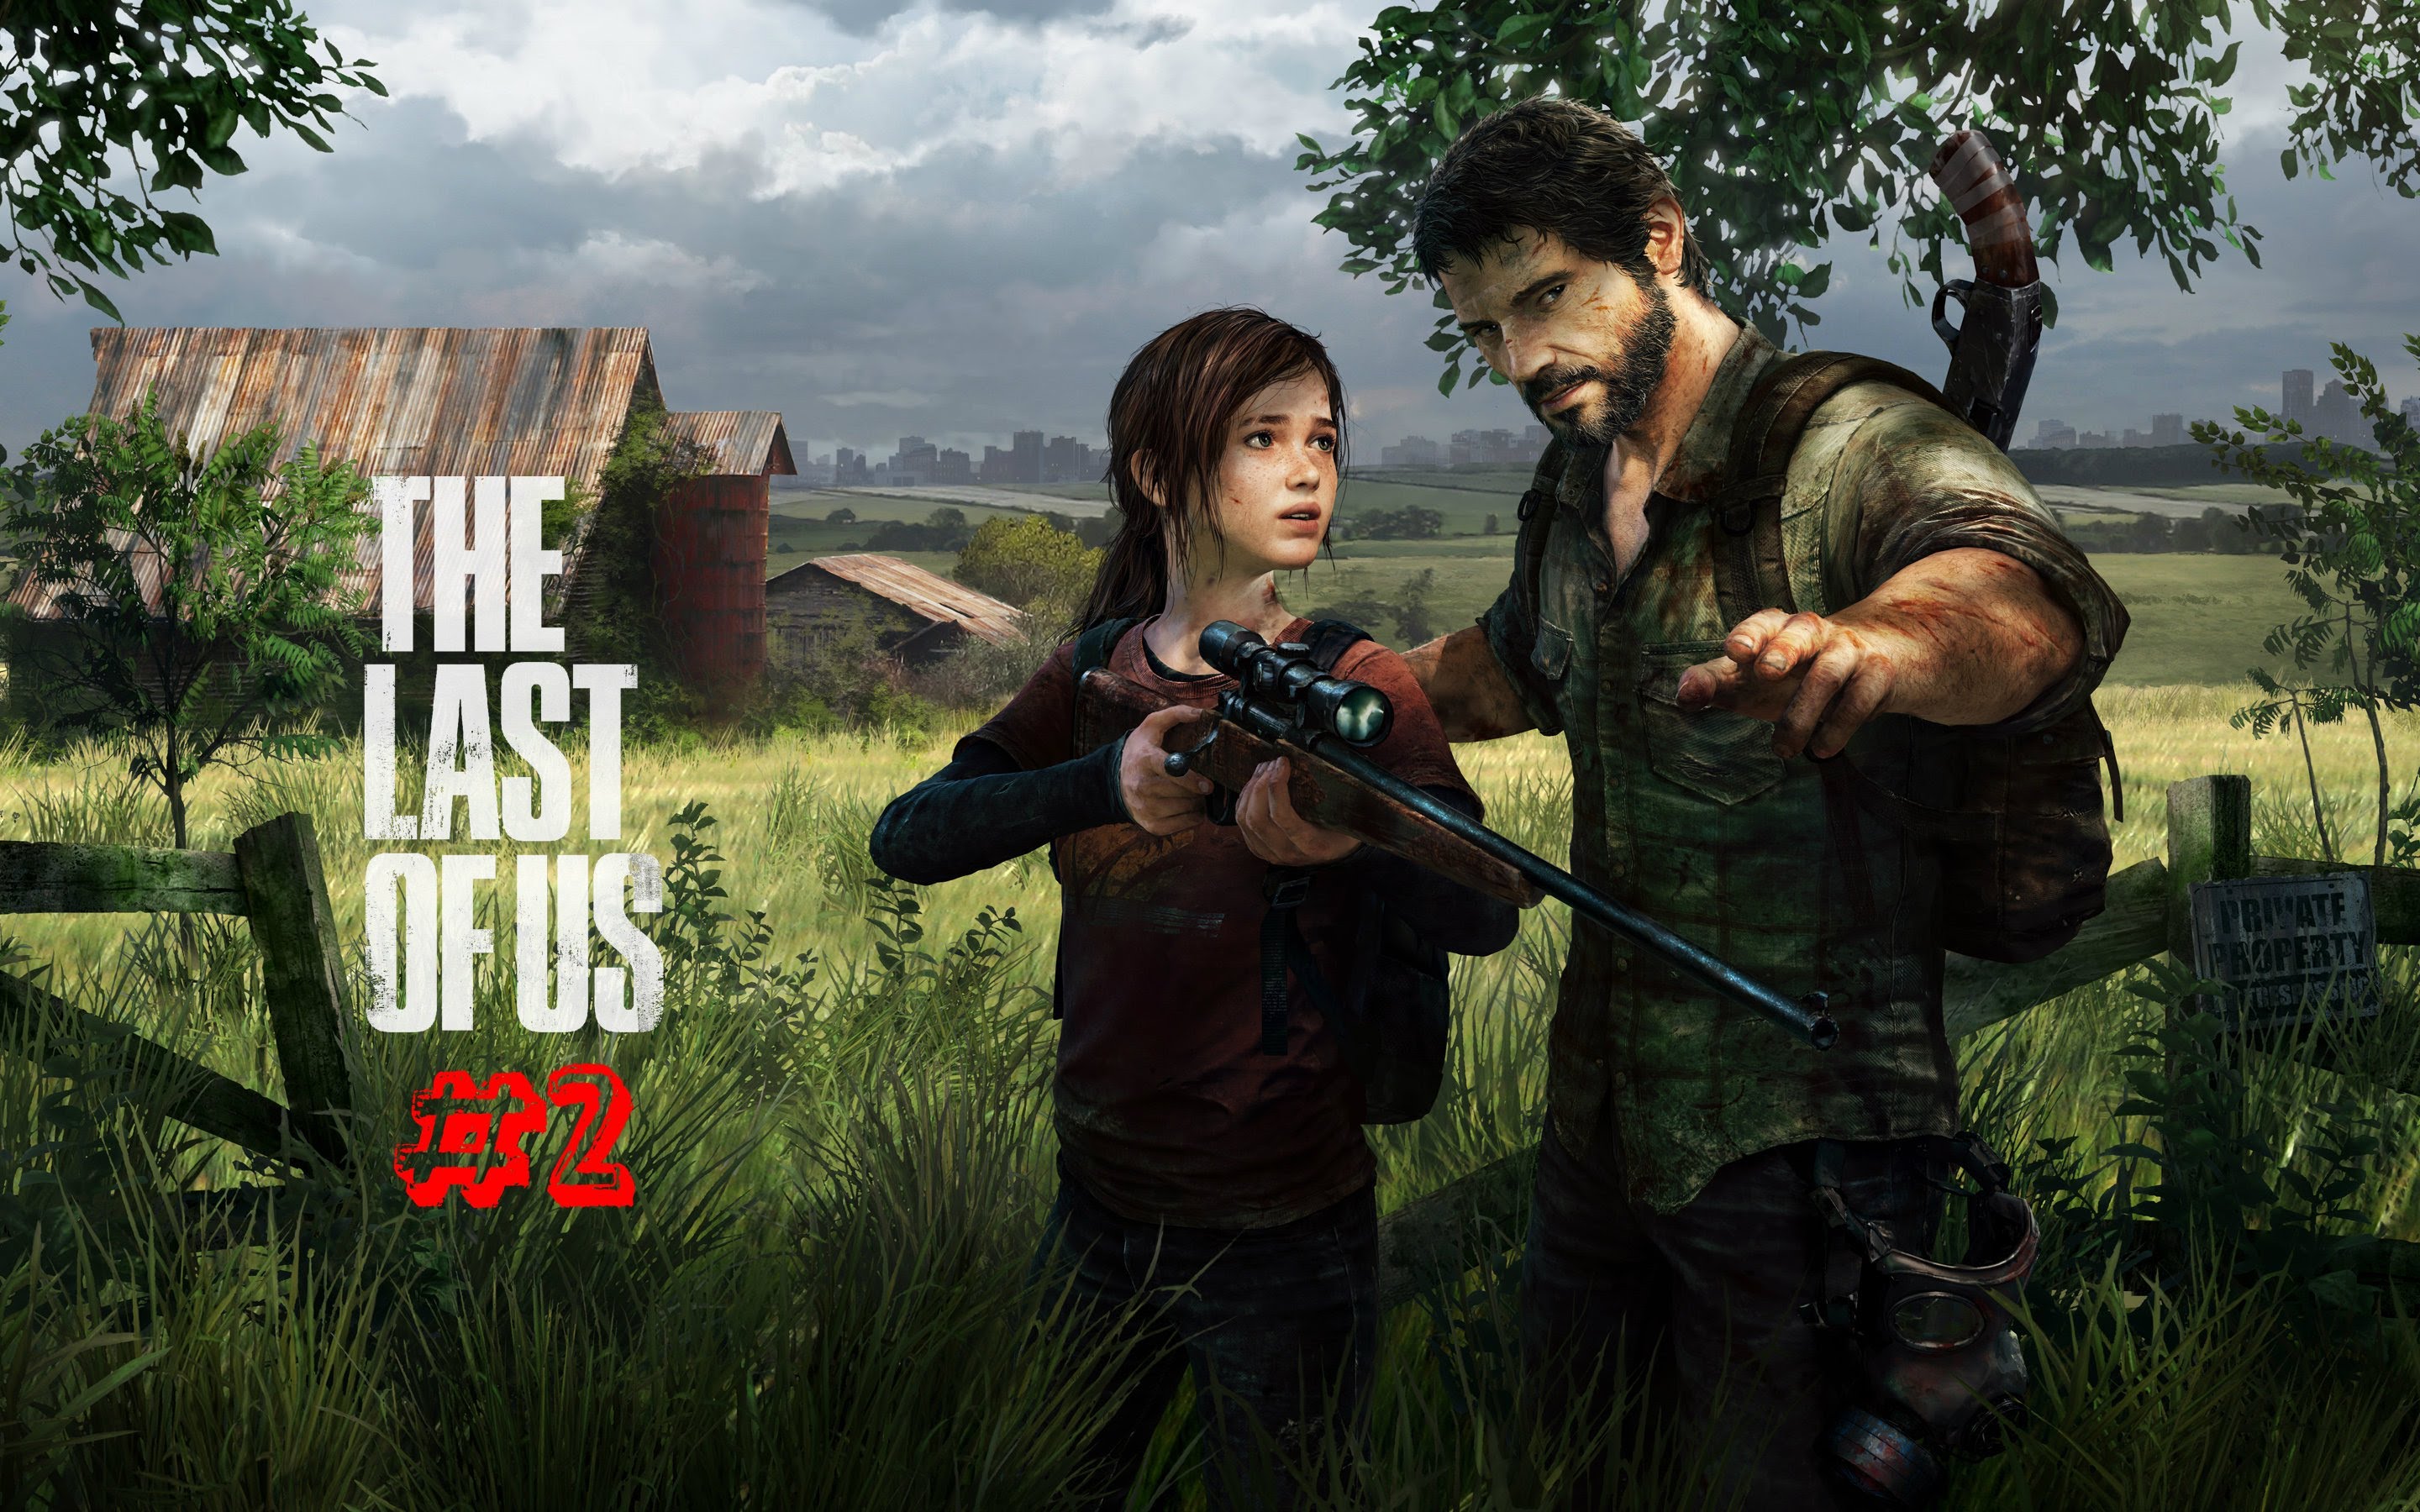 Check out these stunning The Last of Us wallpapers created by Yoji